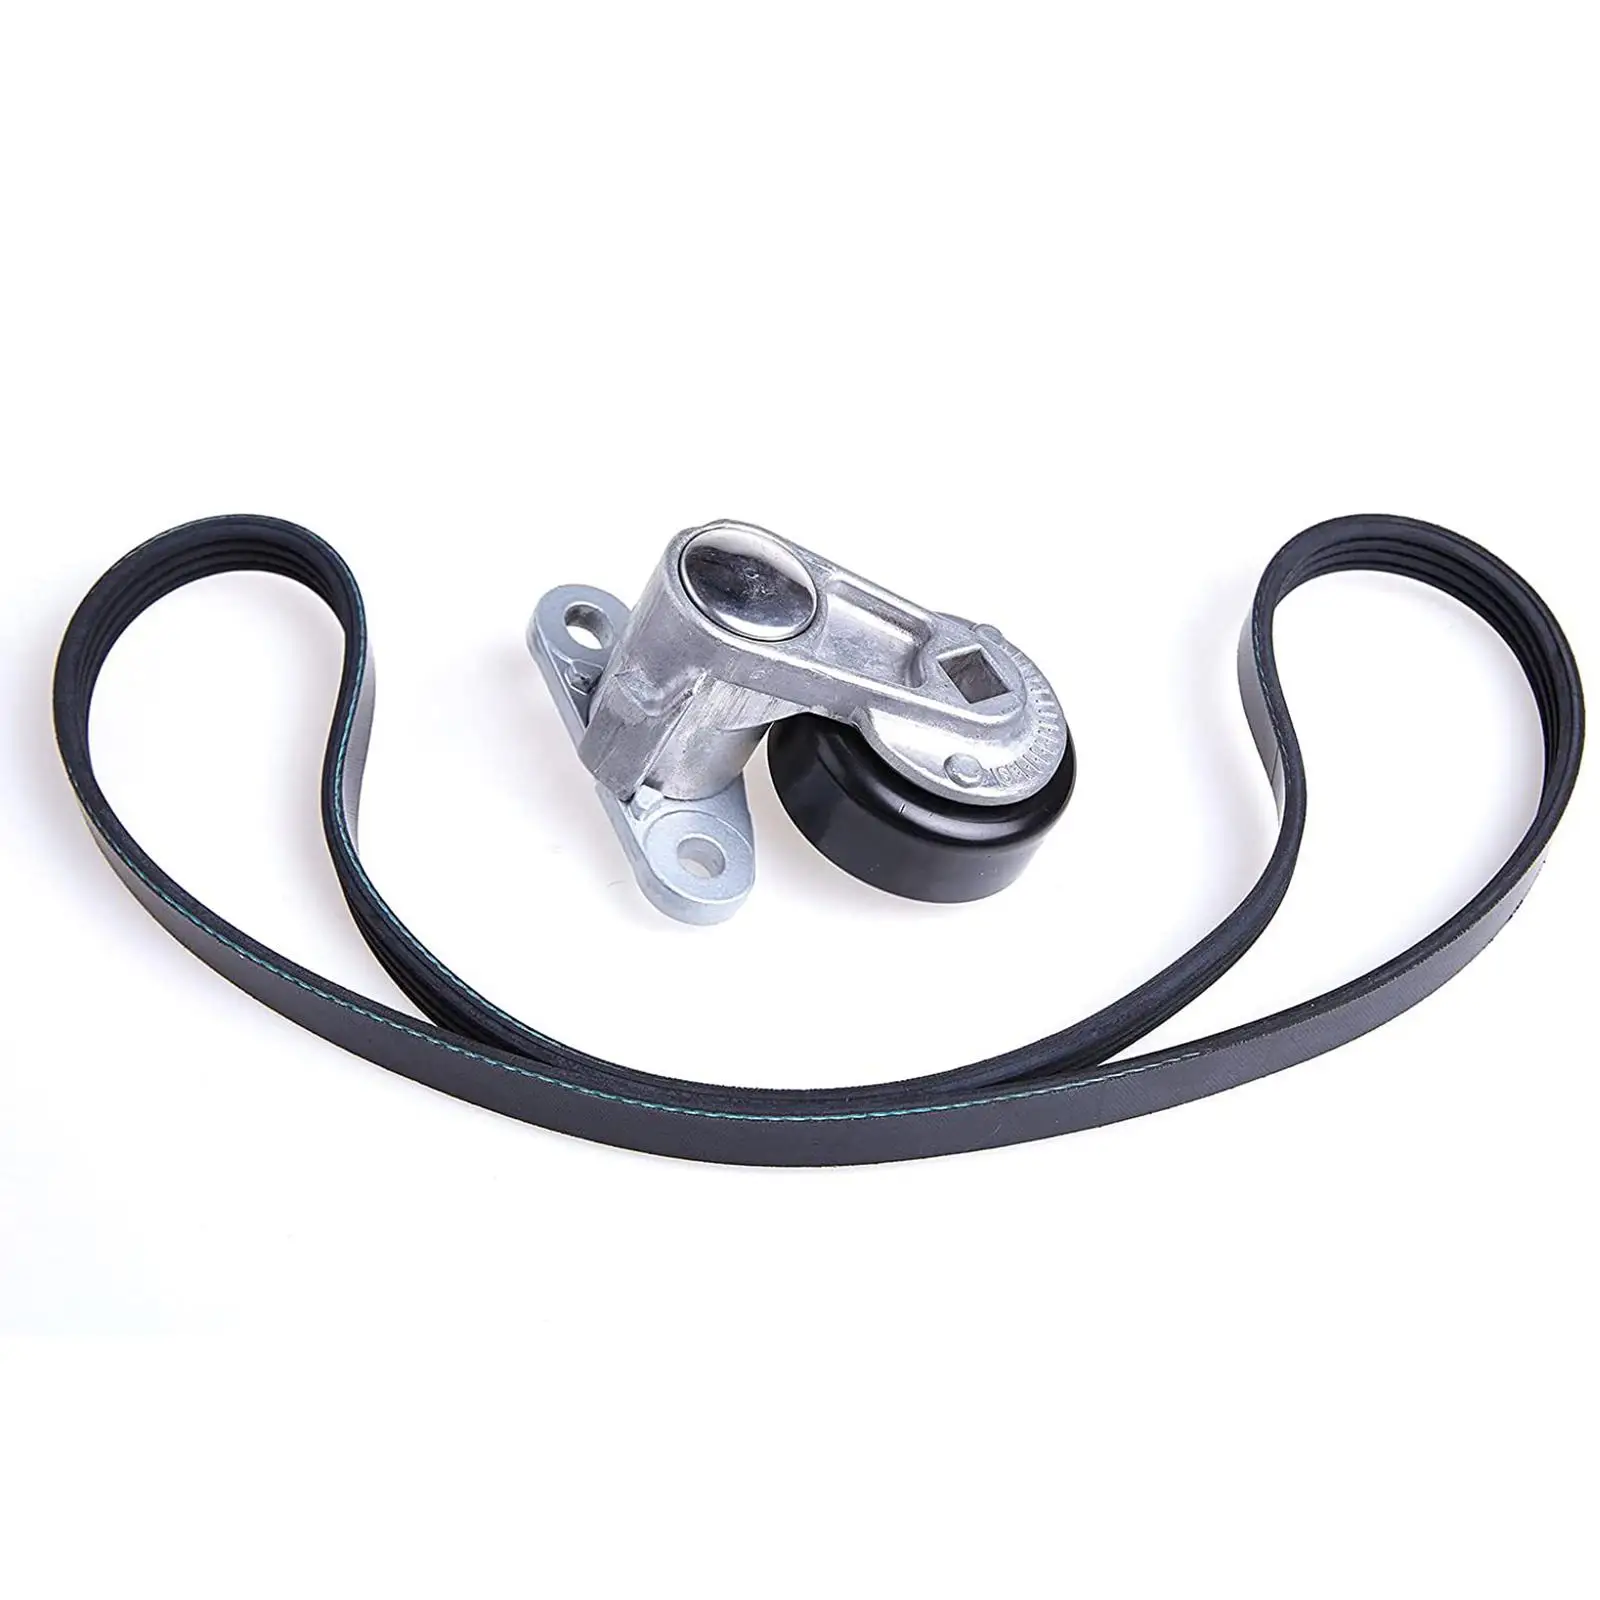 Drive Belt Tensioner Kit Repair Parts Replace Part for 1500 2500 3500 High Performance